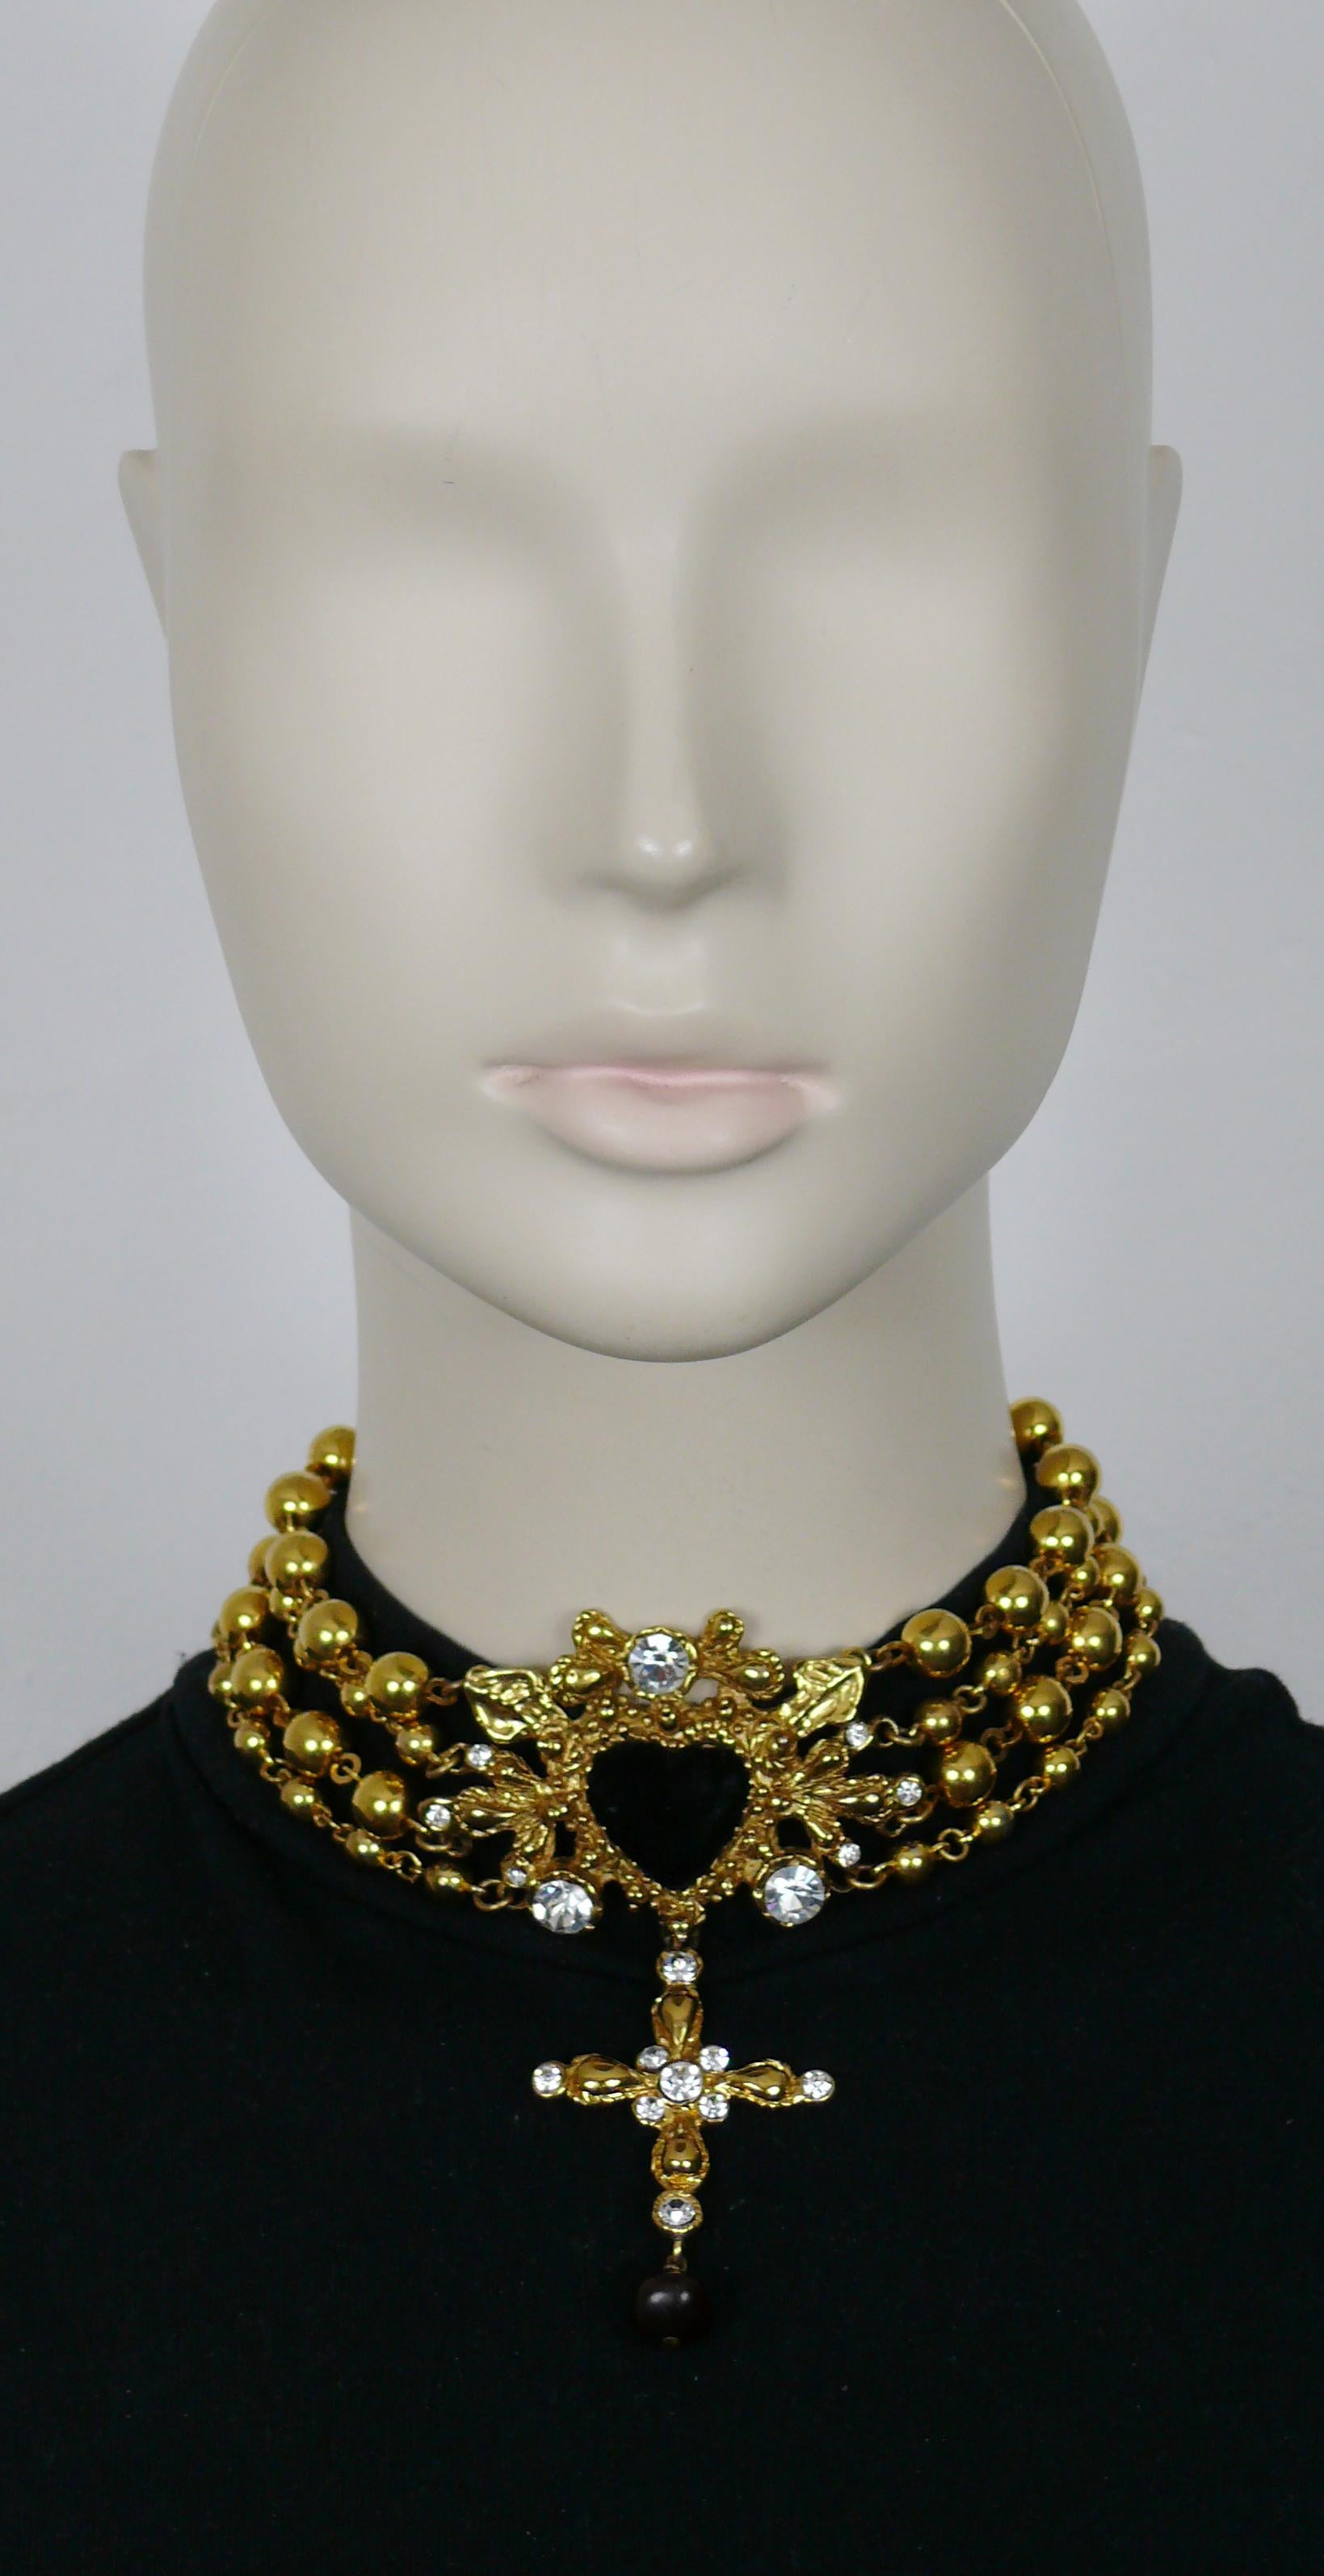 CHRISTIAN LACROIX vintage gold tone multistrand ball chain choker necklace featuring a black velvet heart centerpiece, a dangling cross, with clear crystals embellishement.

Adjustable hook clasp closure.

Marked CHRISTIAN LACROIX CL Made in